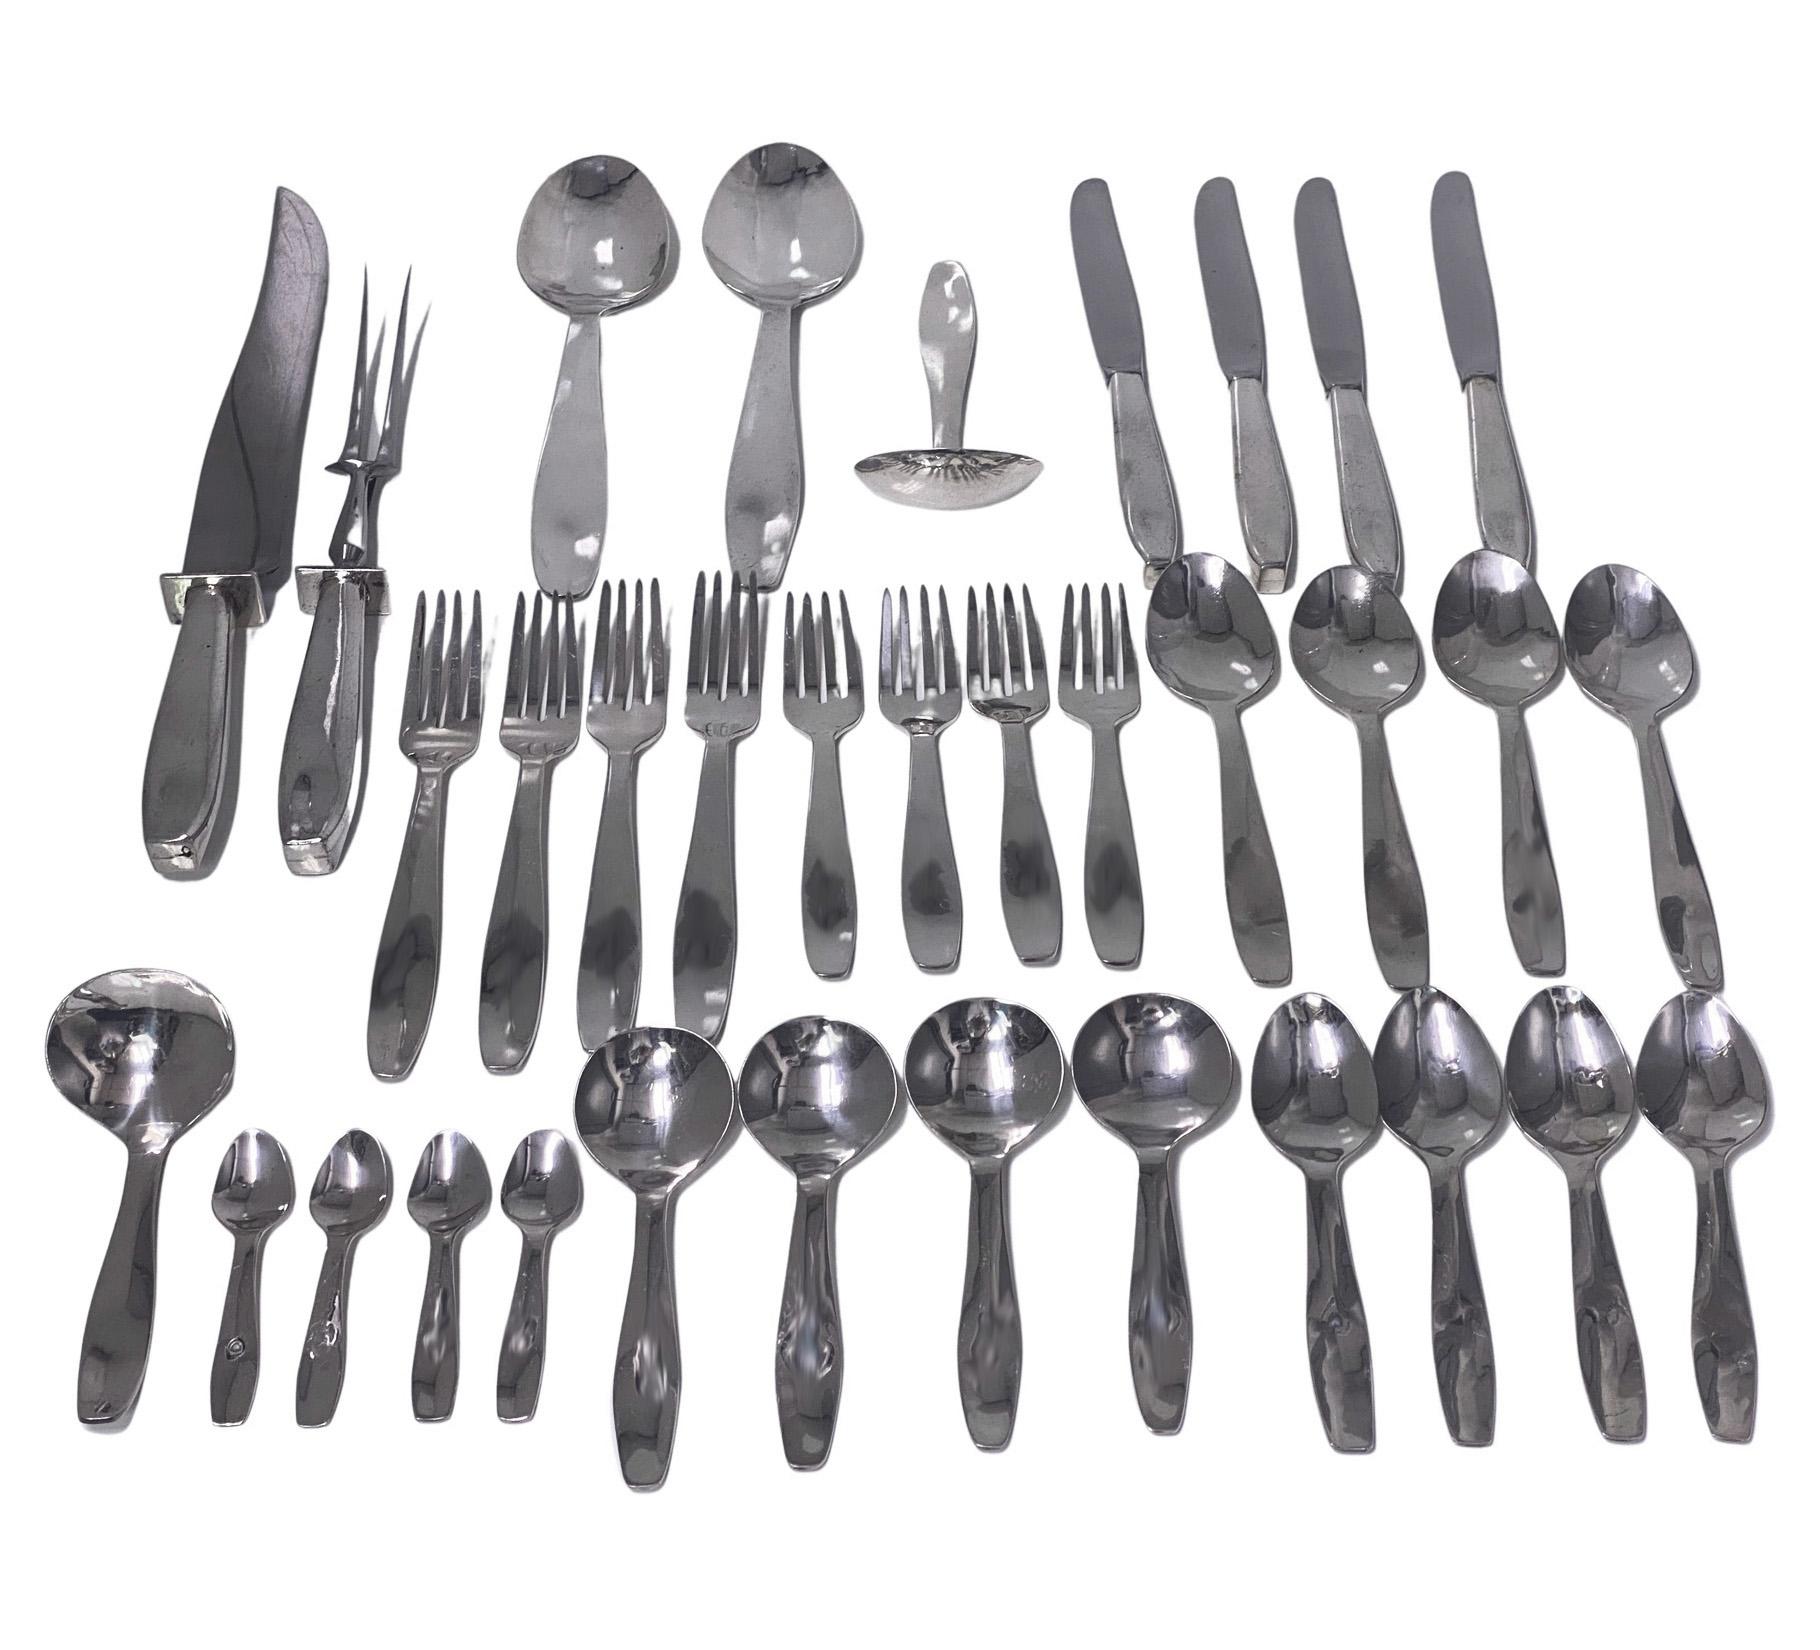 Stunning Douglas Boyd rare hand forged sterling silver flatware set for four 1966. Hand made planished with lightly hammered finish. Plain design with undulating handles. Each piece signed Signed Boyd 66. Lengths: (excluding carvers) 9.00 inches